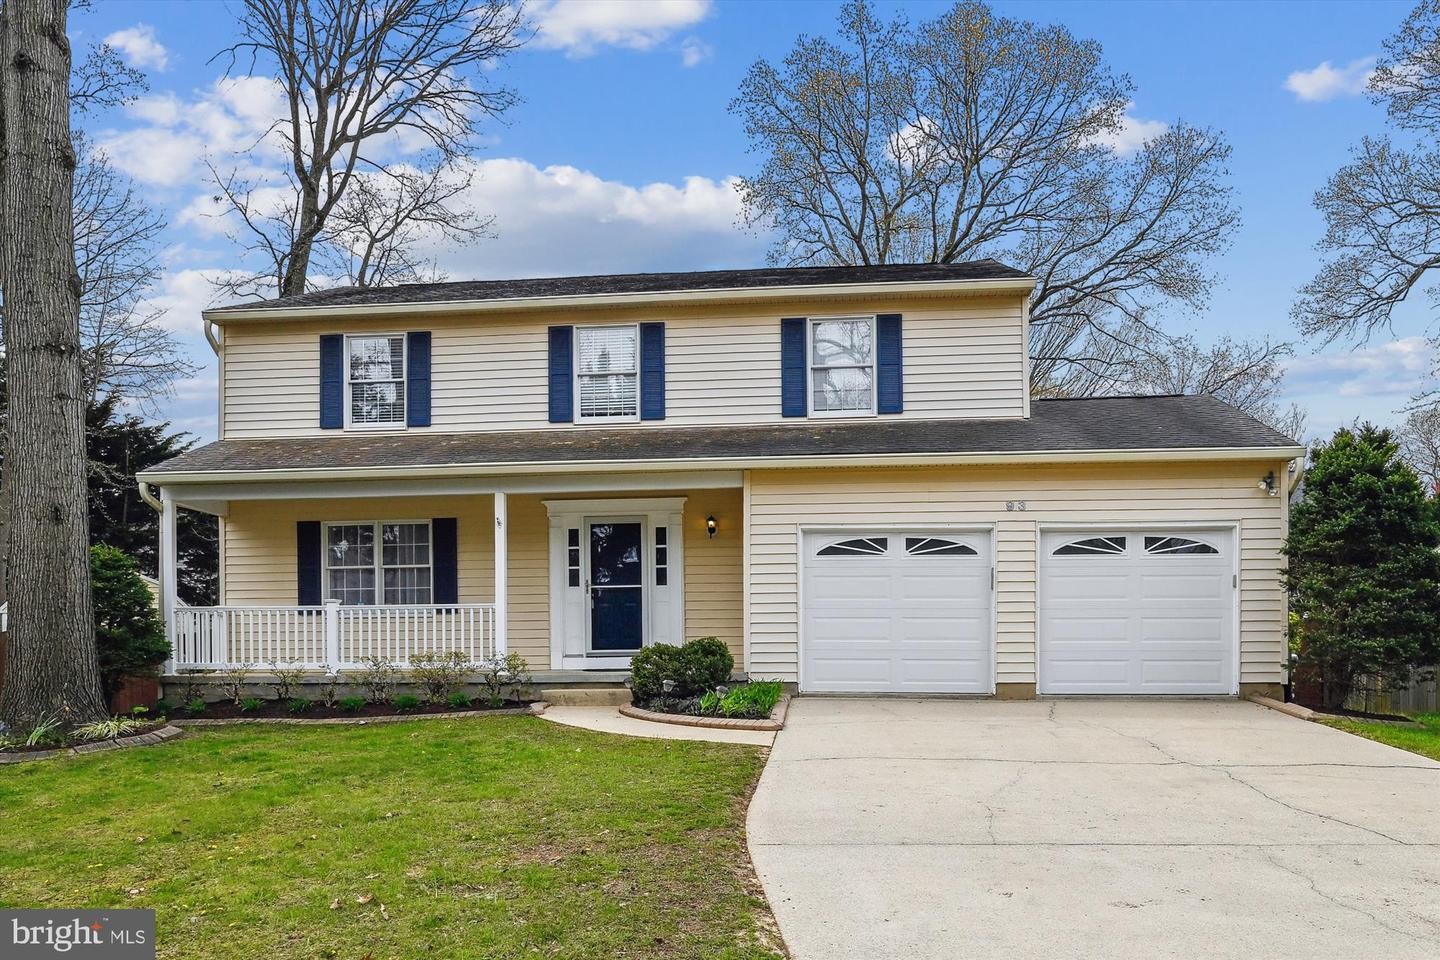 1. 93 Foxchase Ct